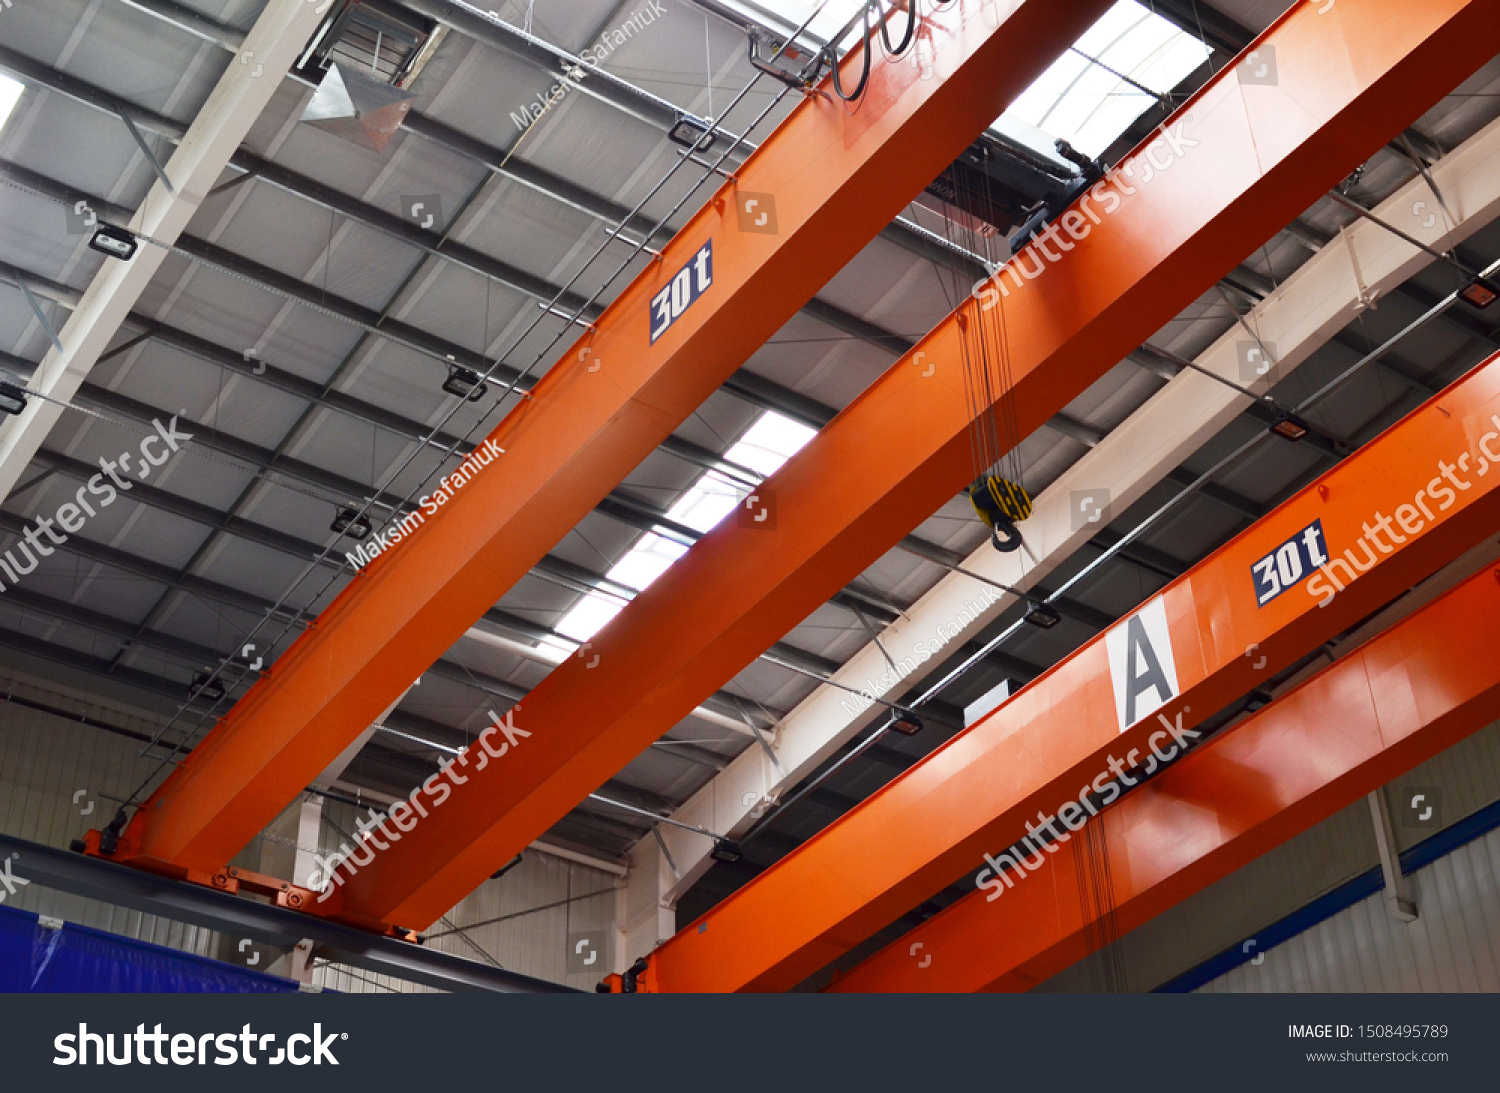 Bridge lifting Crane Hook with electric engines on the background of the industrial workshop production plant. The concept of a heavy manufacturing process at an industrial factory #1508495789